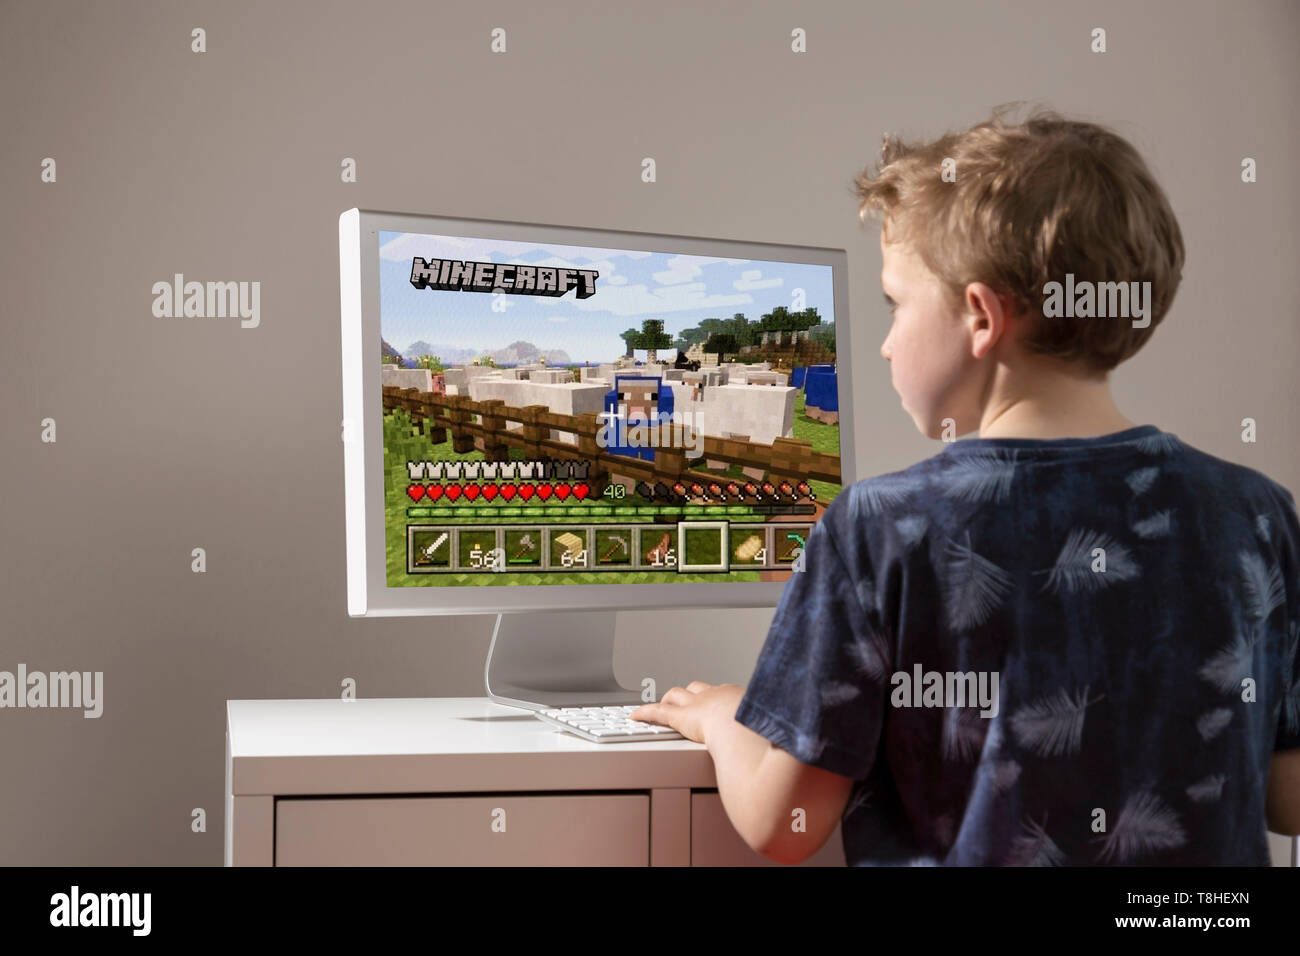 Boy playing the computer game minecraft Stock Photo